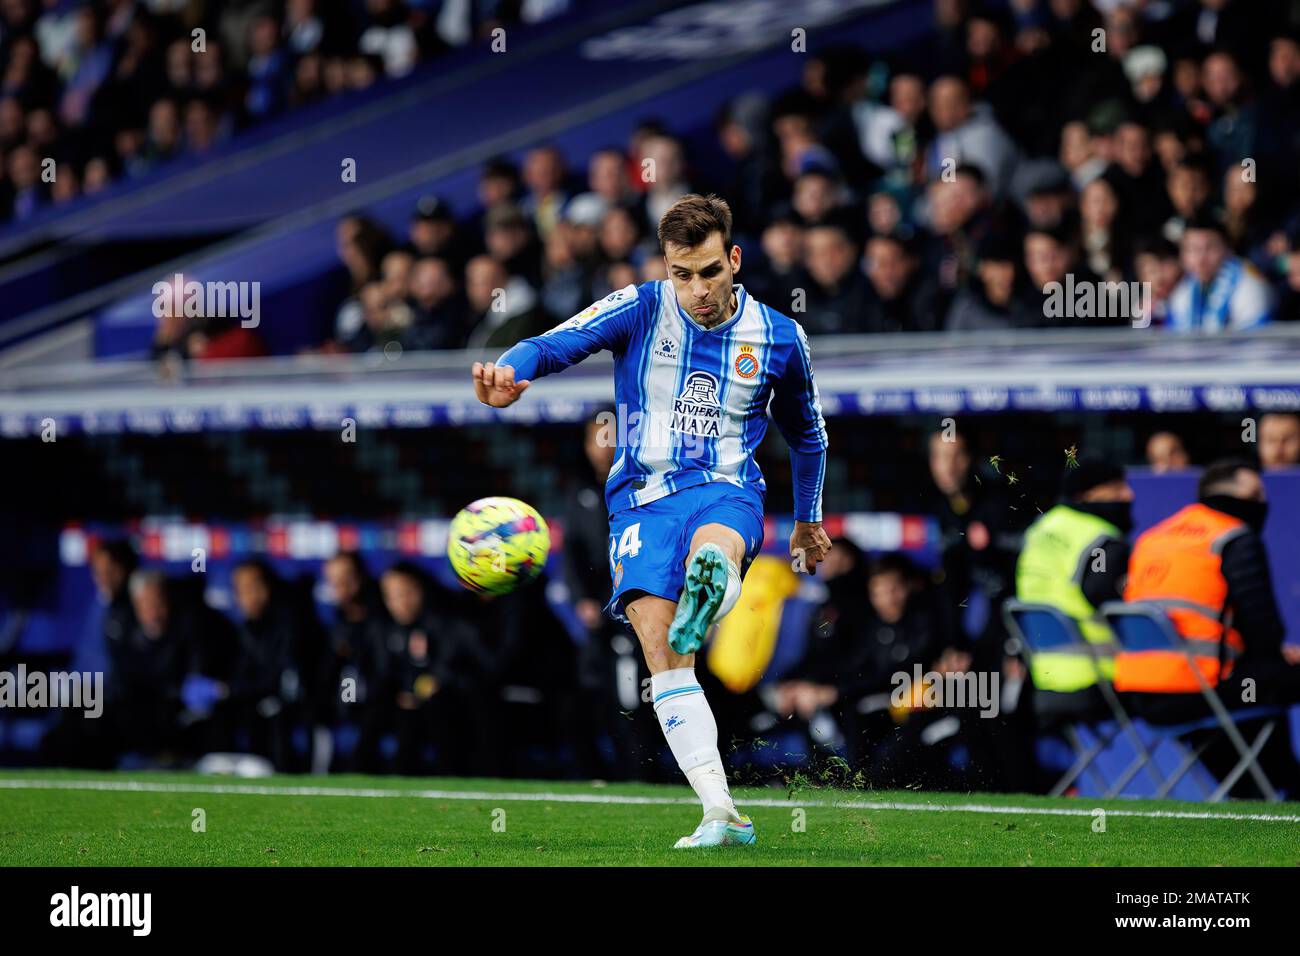 BARCELONA - JAN 7: Brian Olivan in action at the LaLiga match between RCD Espanyol and Girona FC at the RCDE Stadium on January 7, 2023 in Barcelona, Stock Photo